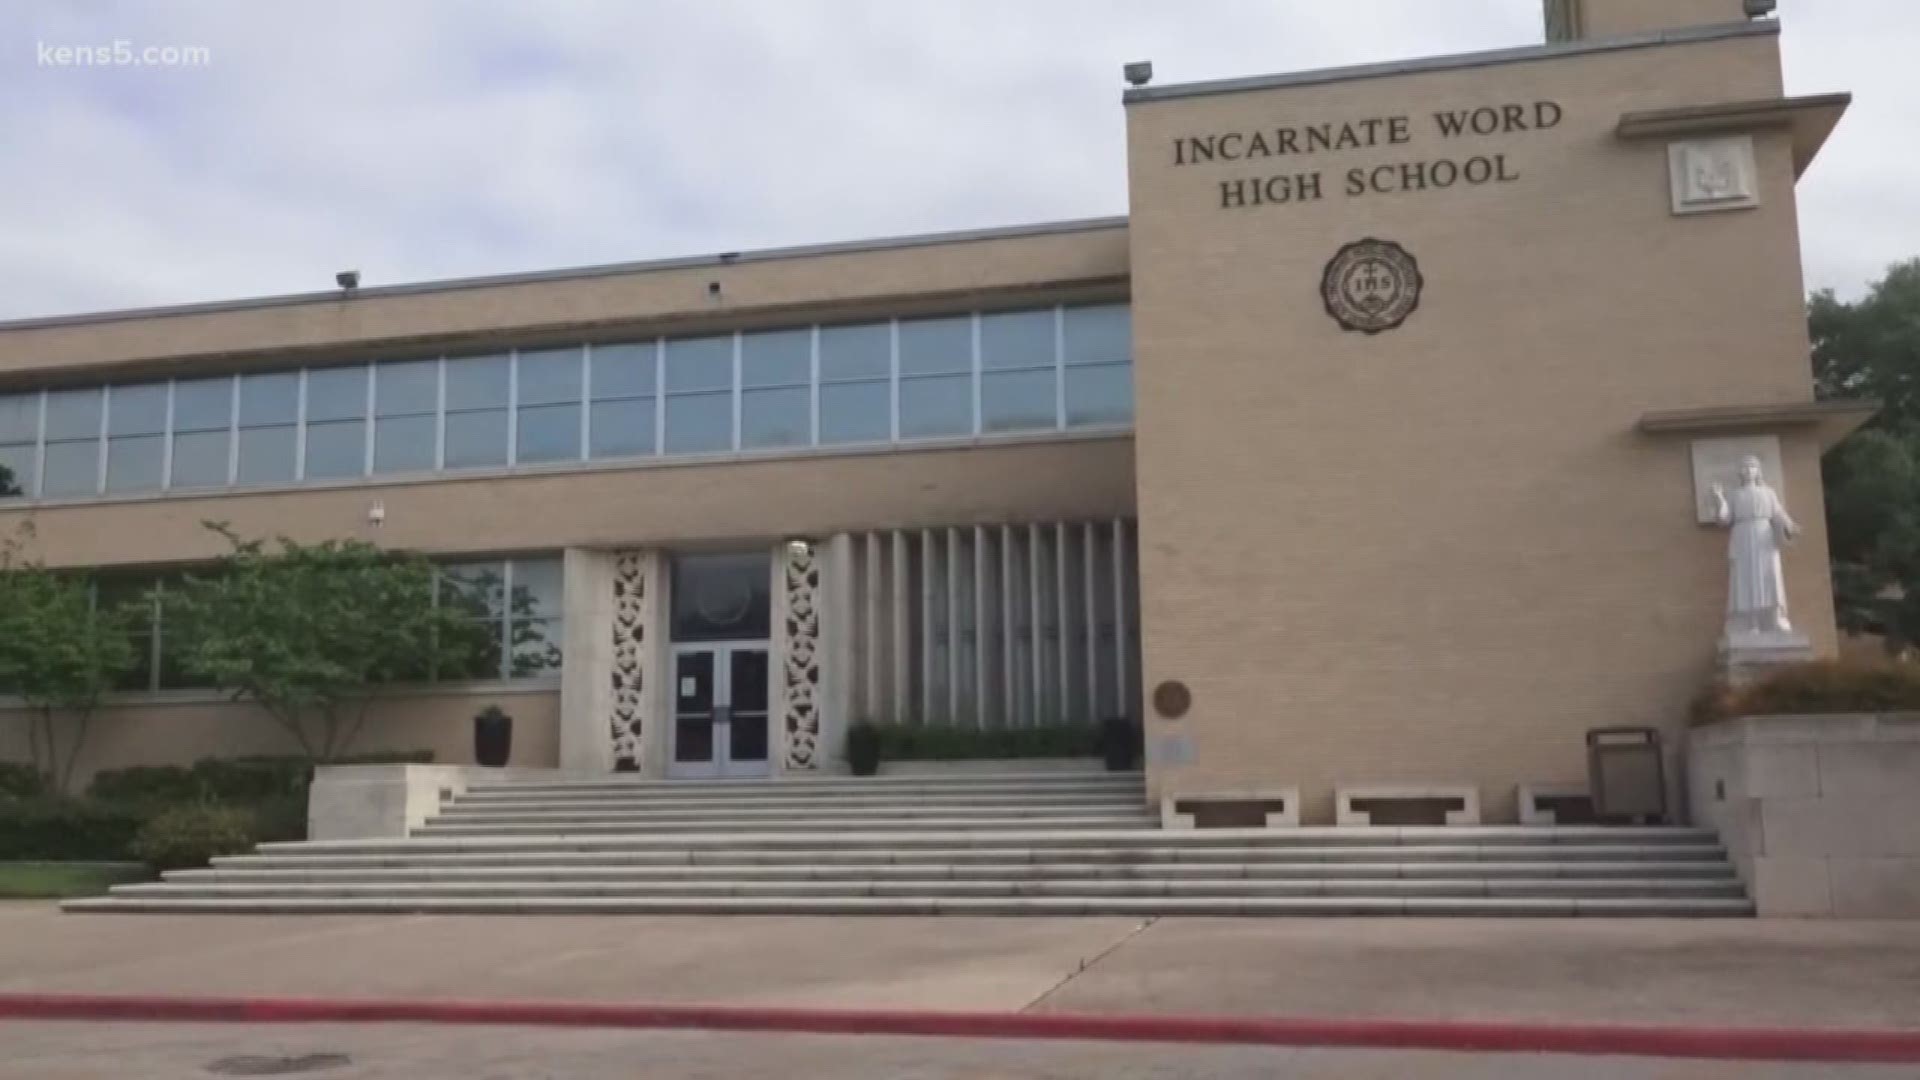 Incarnate Word High School is full of traditions. But seniors are getting an alternate ending to the final chapter of their journey. Lexi Hazlett sits down with IW.